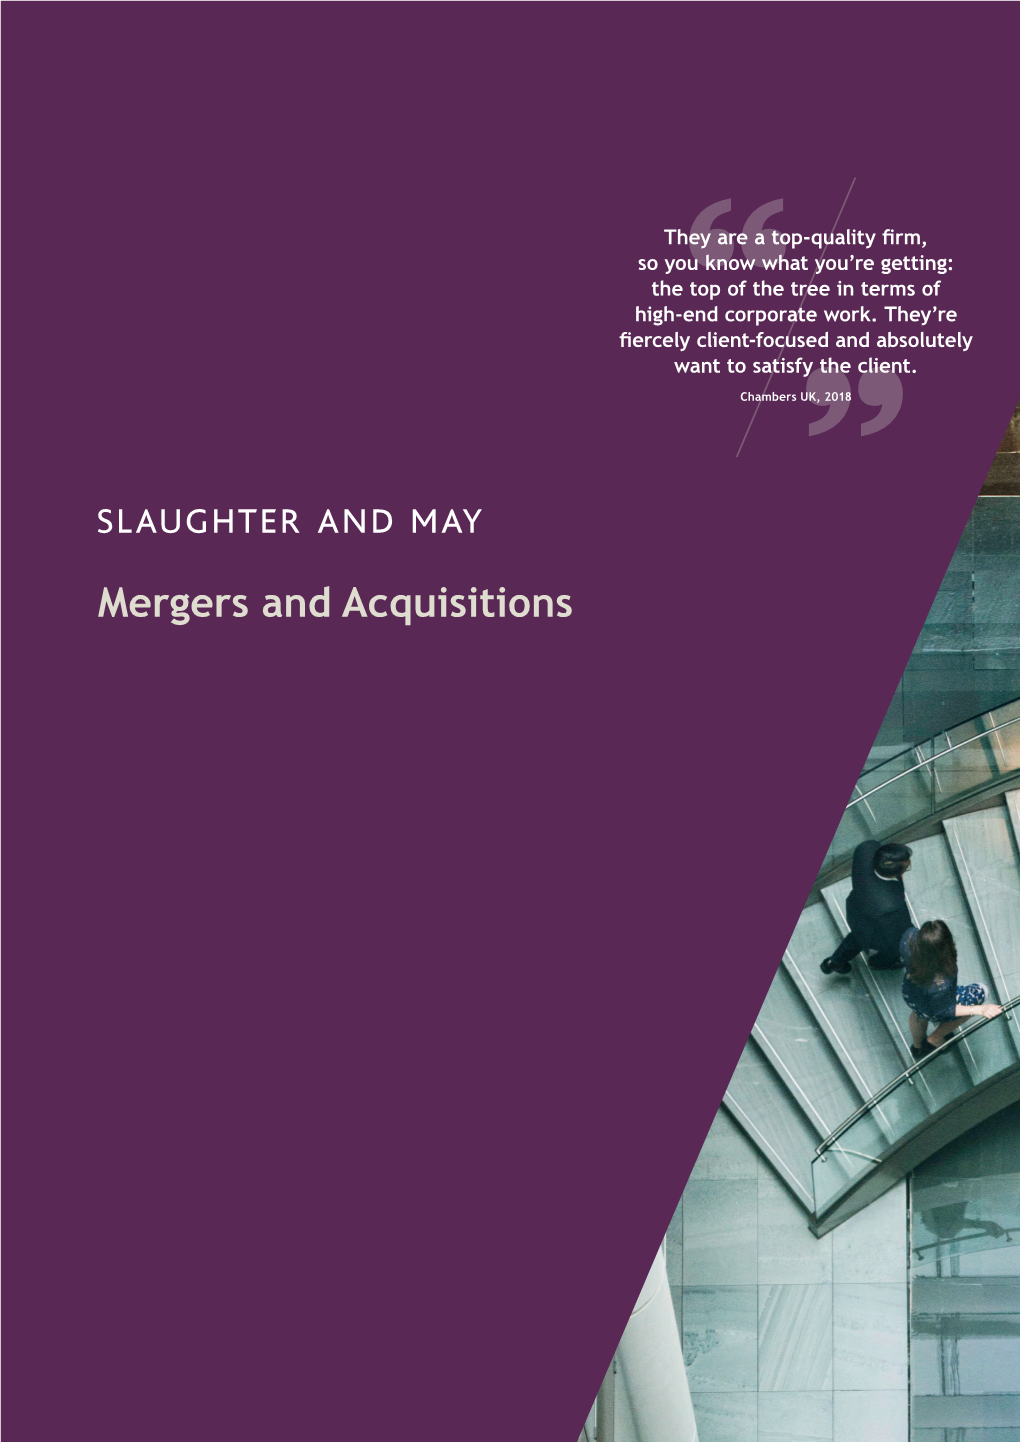 Mergers and Acquisitions Brochure July 2018